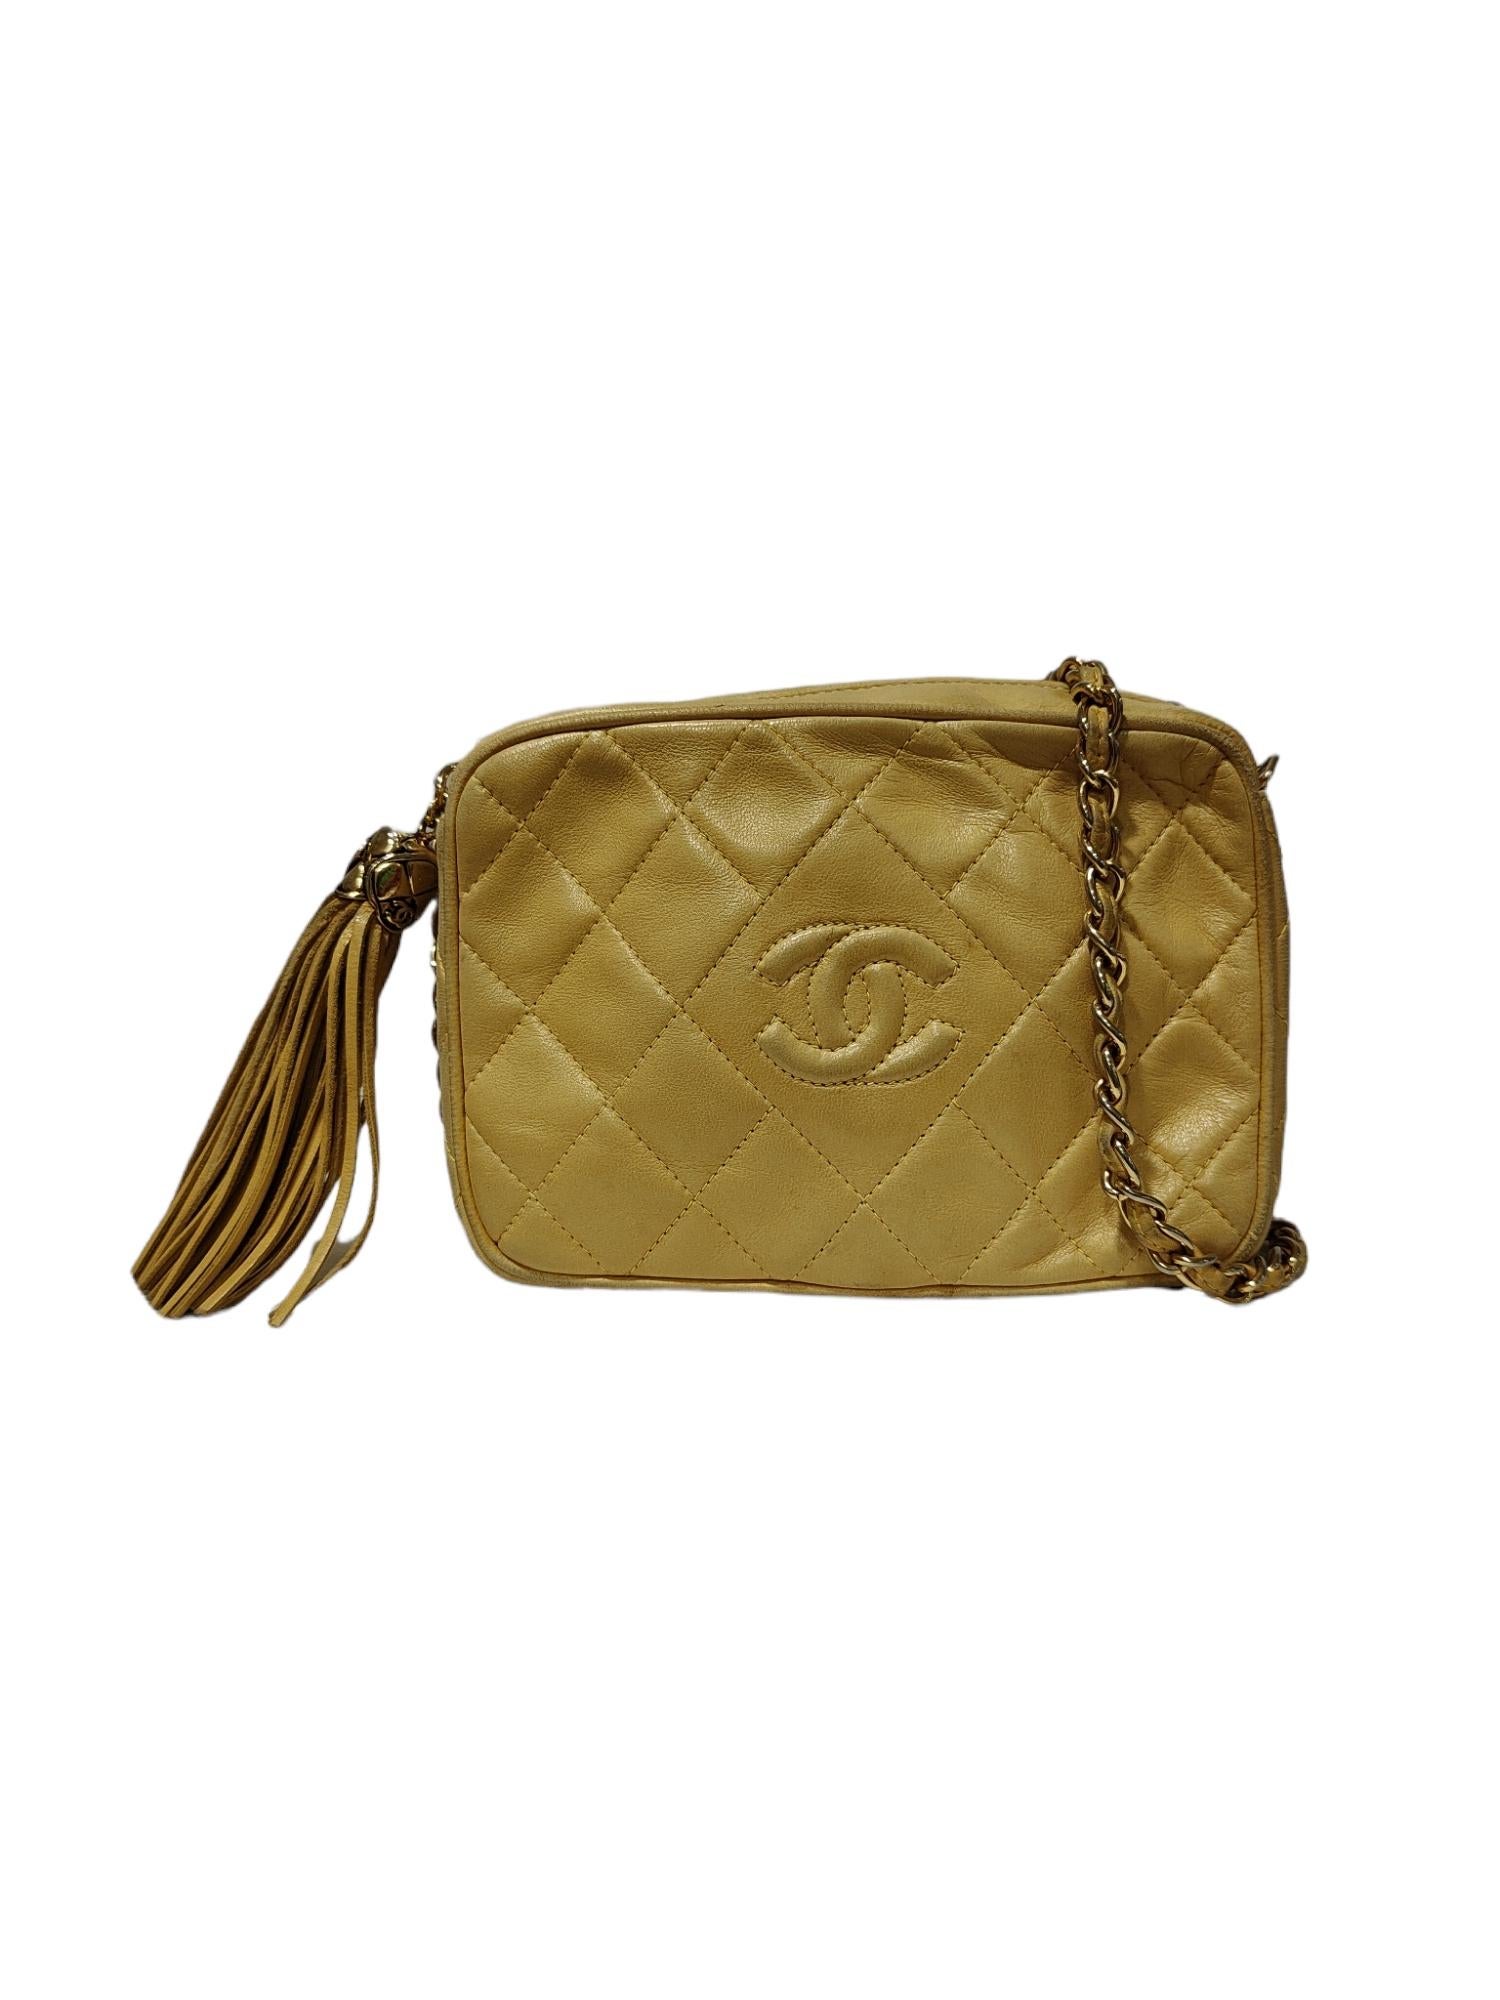 Chanel Yellow leather camera shoulder bag 1